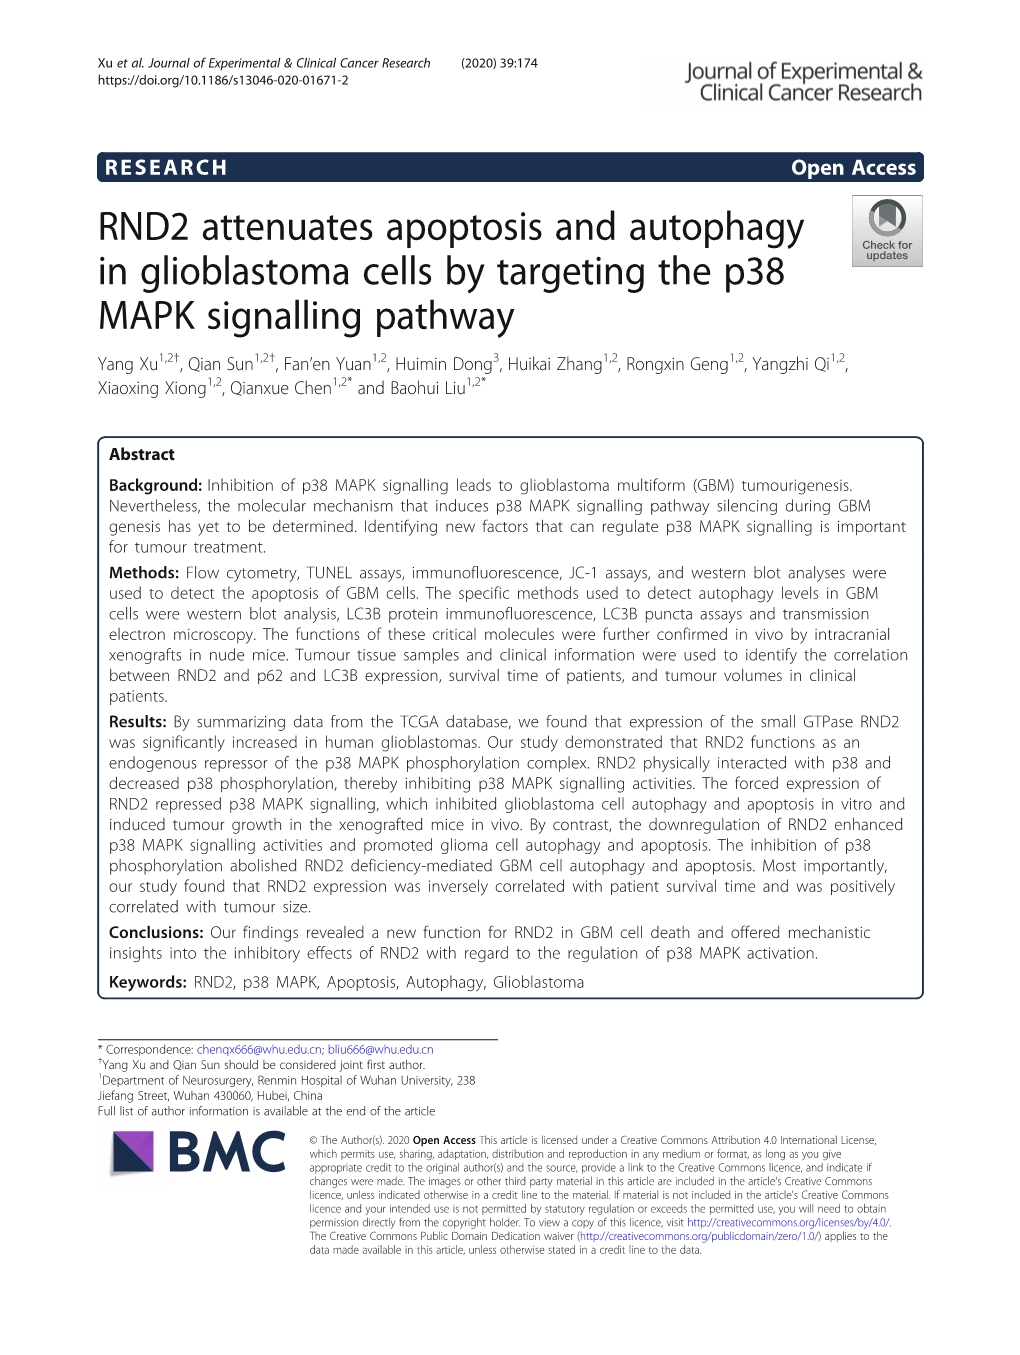 RND2 Attenuates Apoptosis and Autophagy in Glioblastoma Cells By